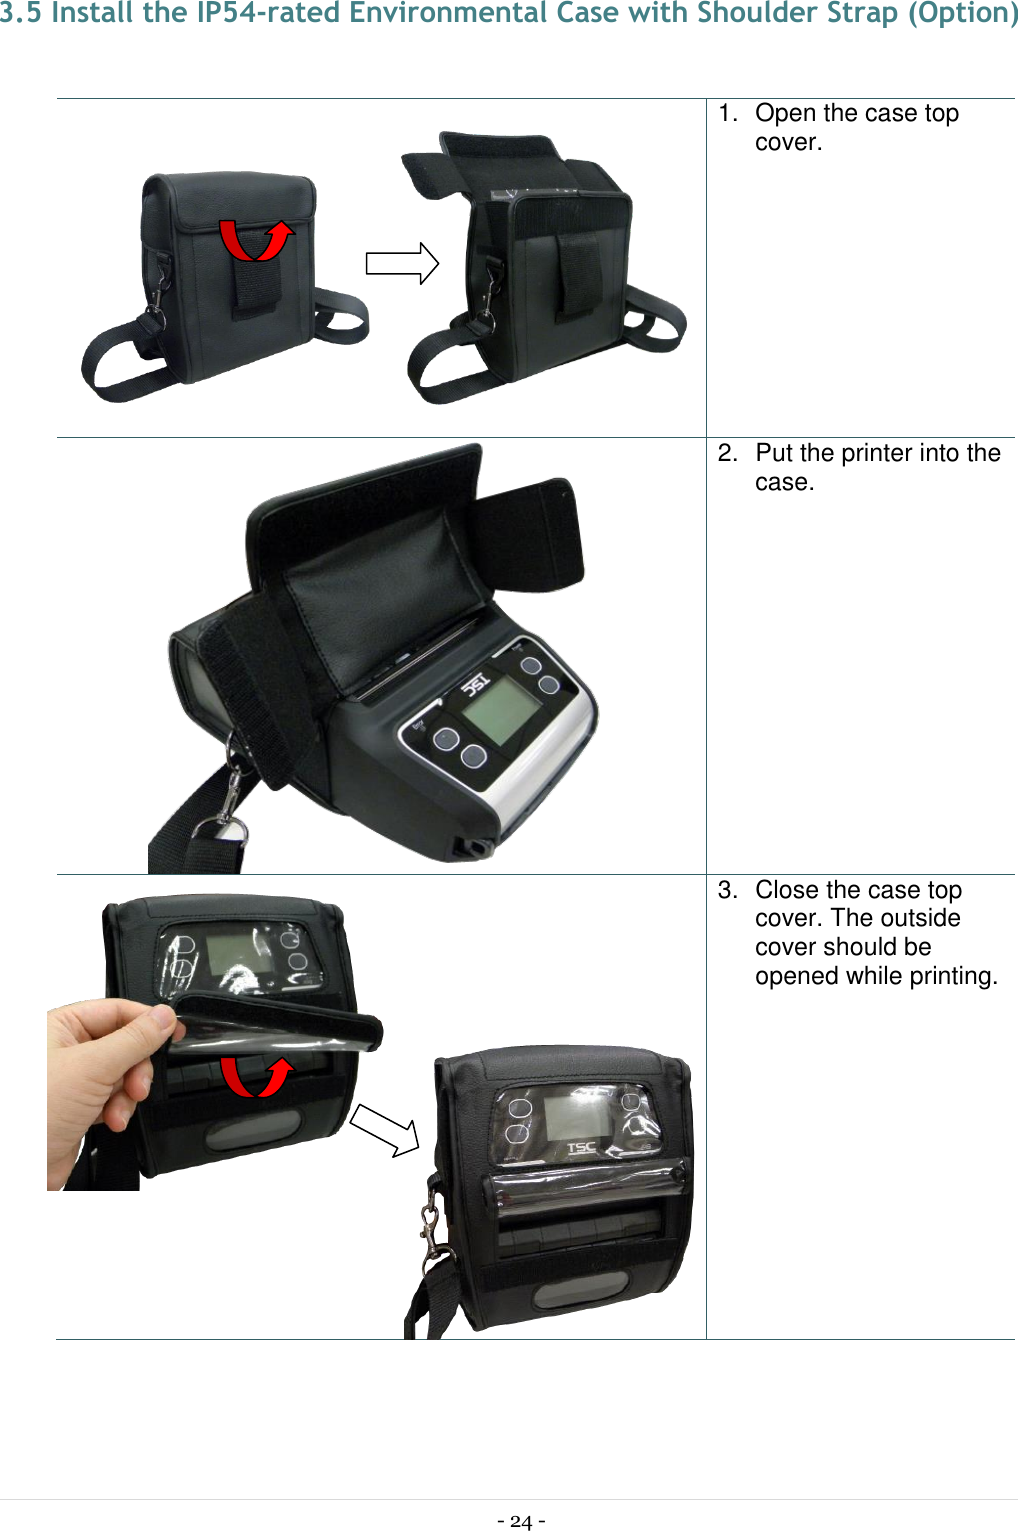  - 24 -  3.5 Install the IP54-rated Environmental Case with Shoulder Strap (Option)      1.  Open the case top cover.  2.  Put the printer into the case.    3.  Close the case top cover. The outside cover should be opened while printing. 